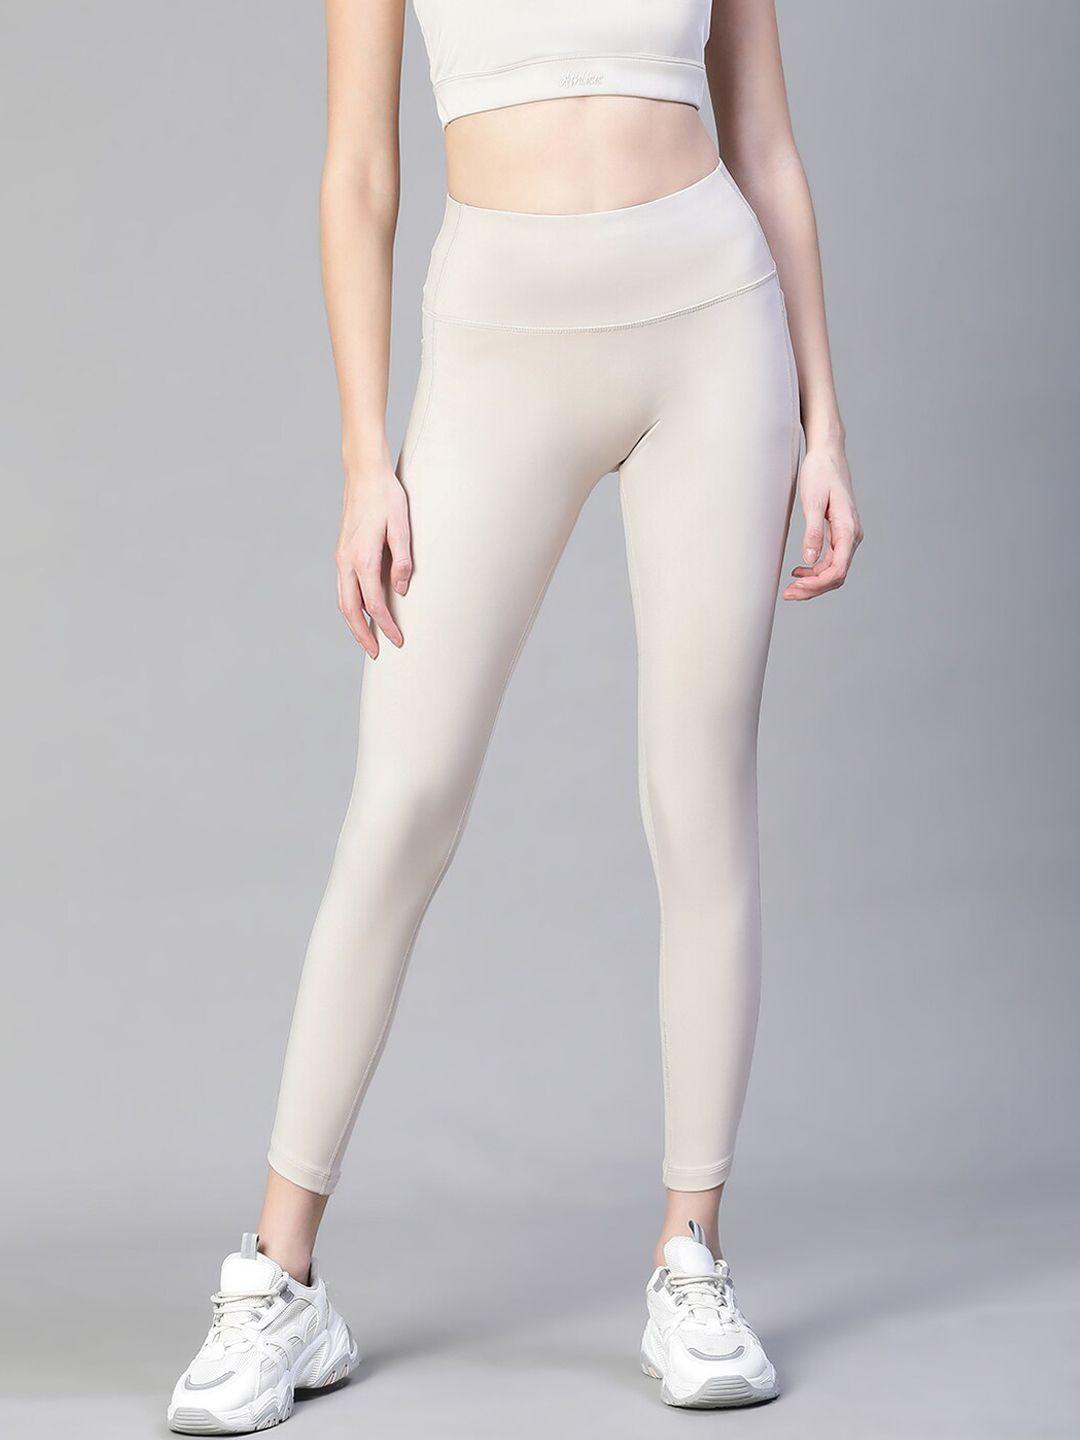 athlisis high-rise e-dry technology sports tights